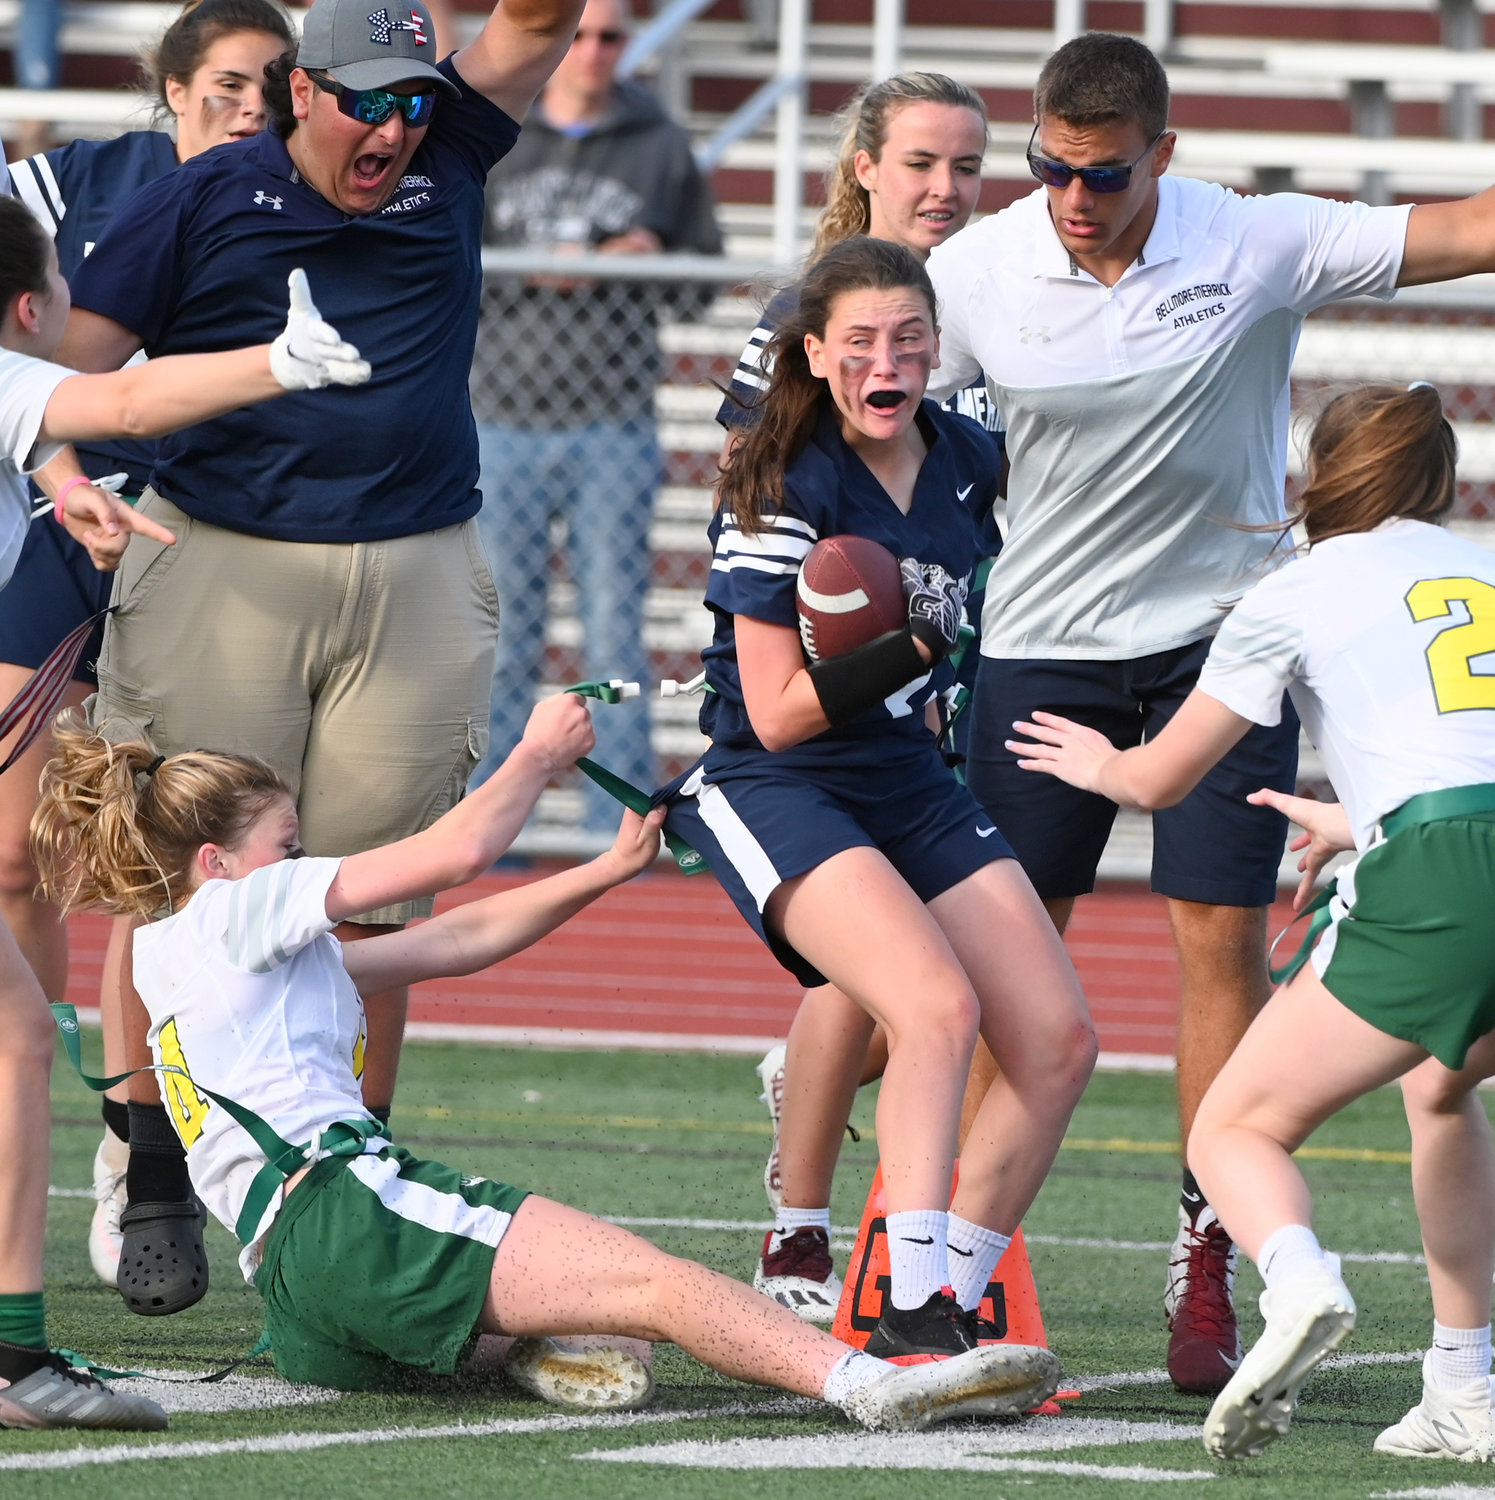 Bellmore-Merrick's Gabrielle Hanellin crossed the goal line for the winning touchdown a split second before Lynbrook's Kaelyn O'Brien, left, removed her flag in Thursday's county championship game.